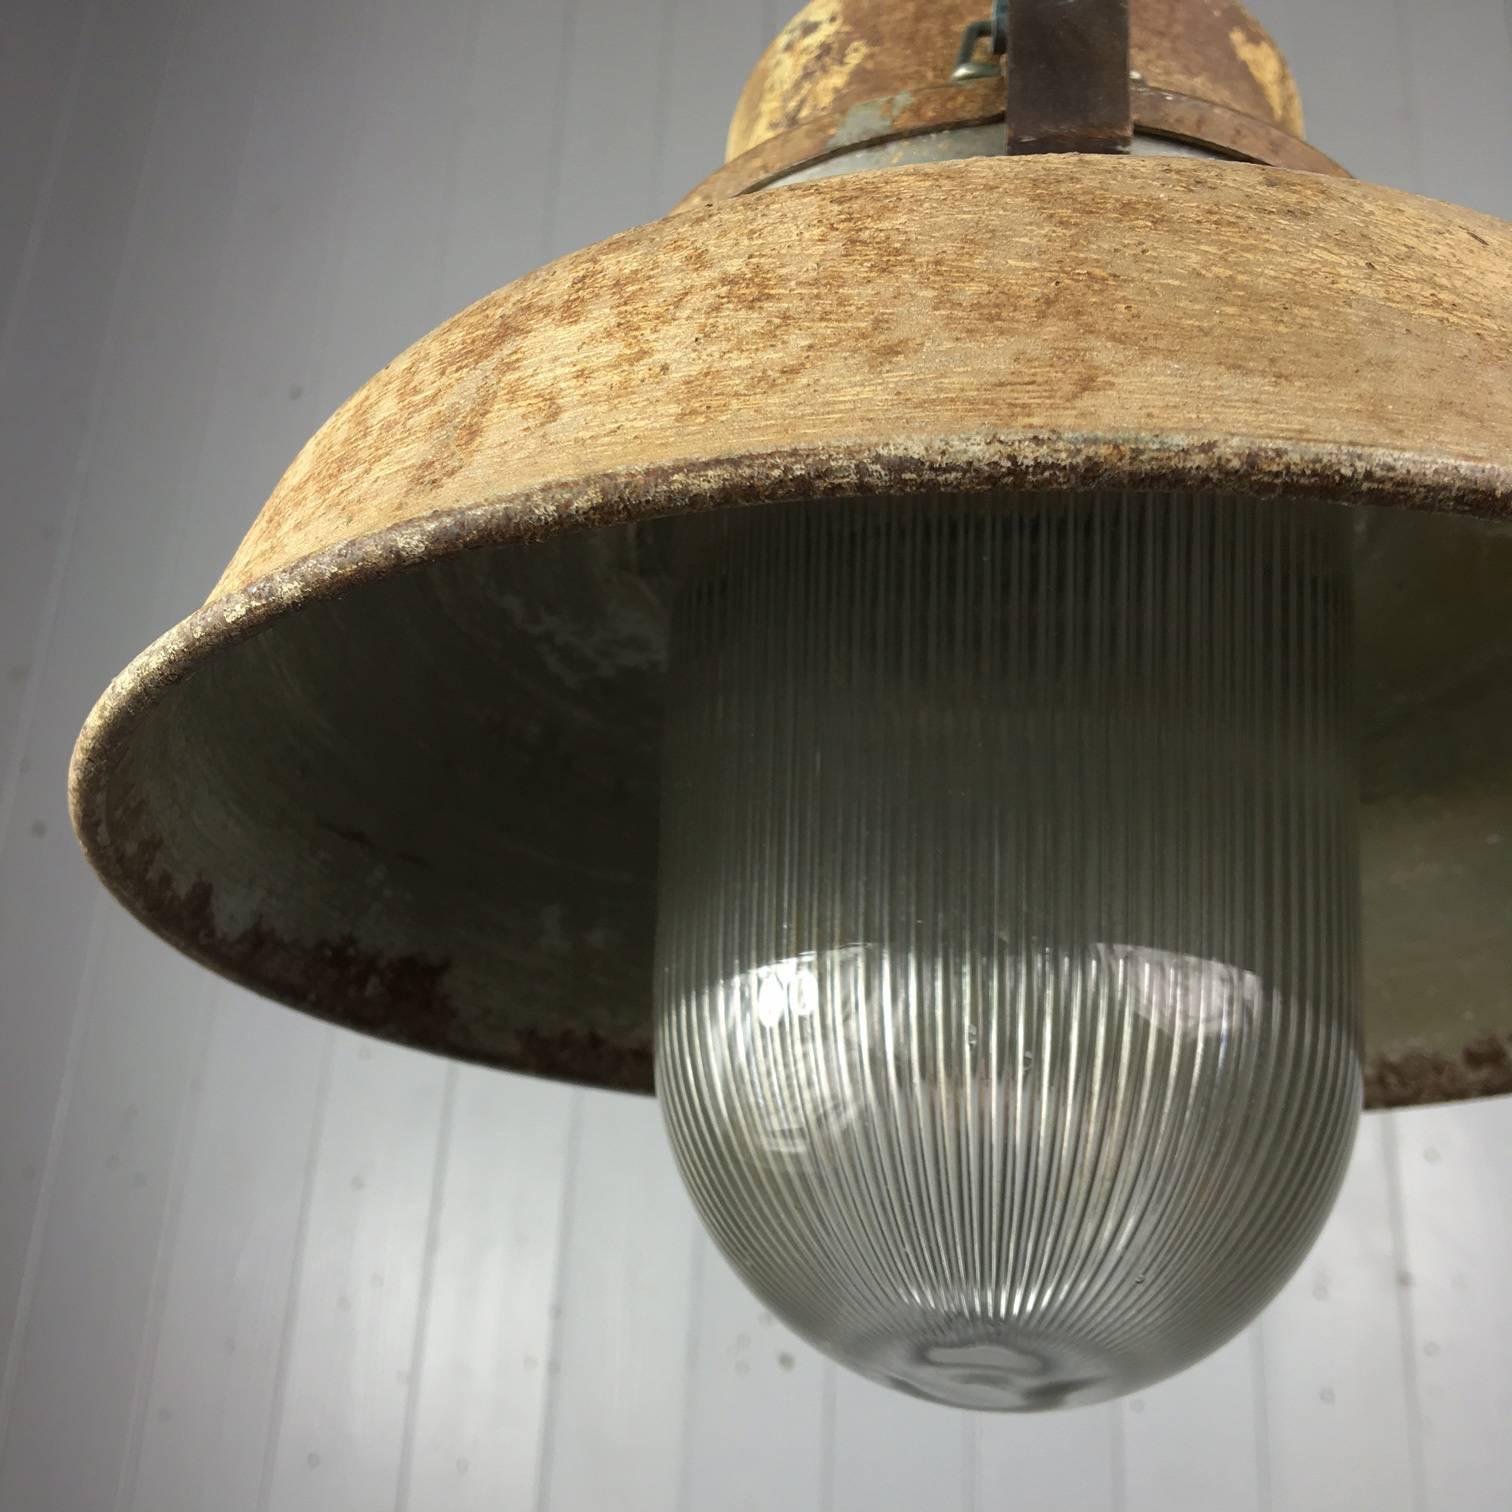 Vintage Prismatic Pendant Lights In Distressed Condition For Sale In Cirencester, Gloucestershire